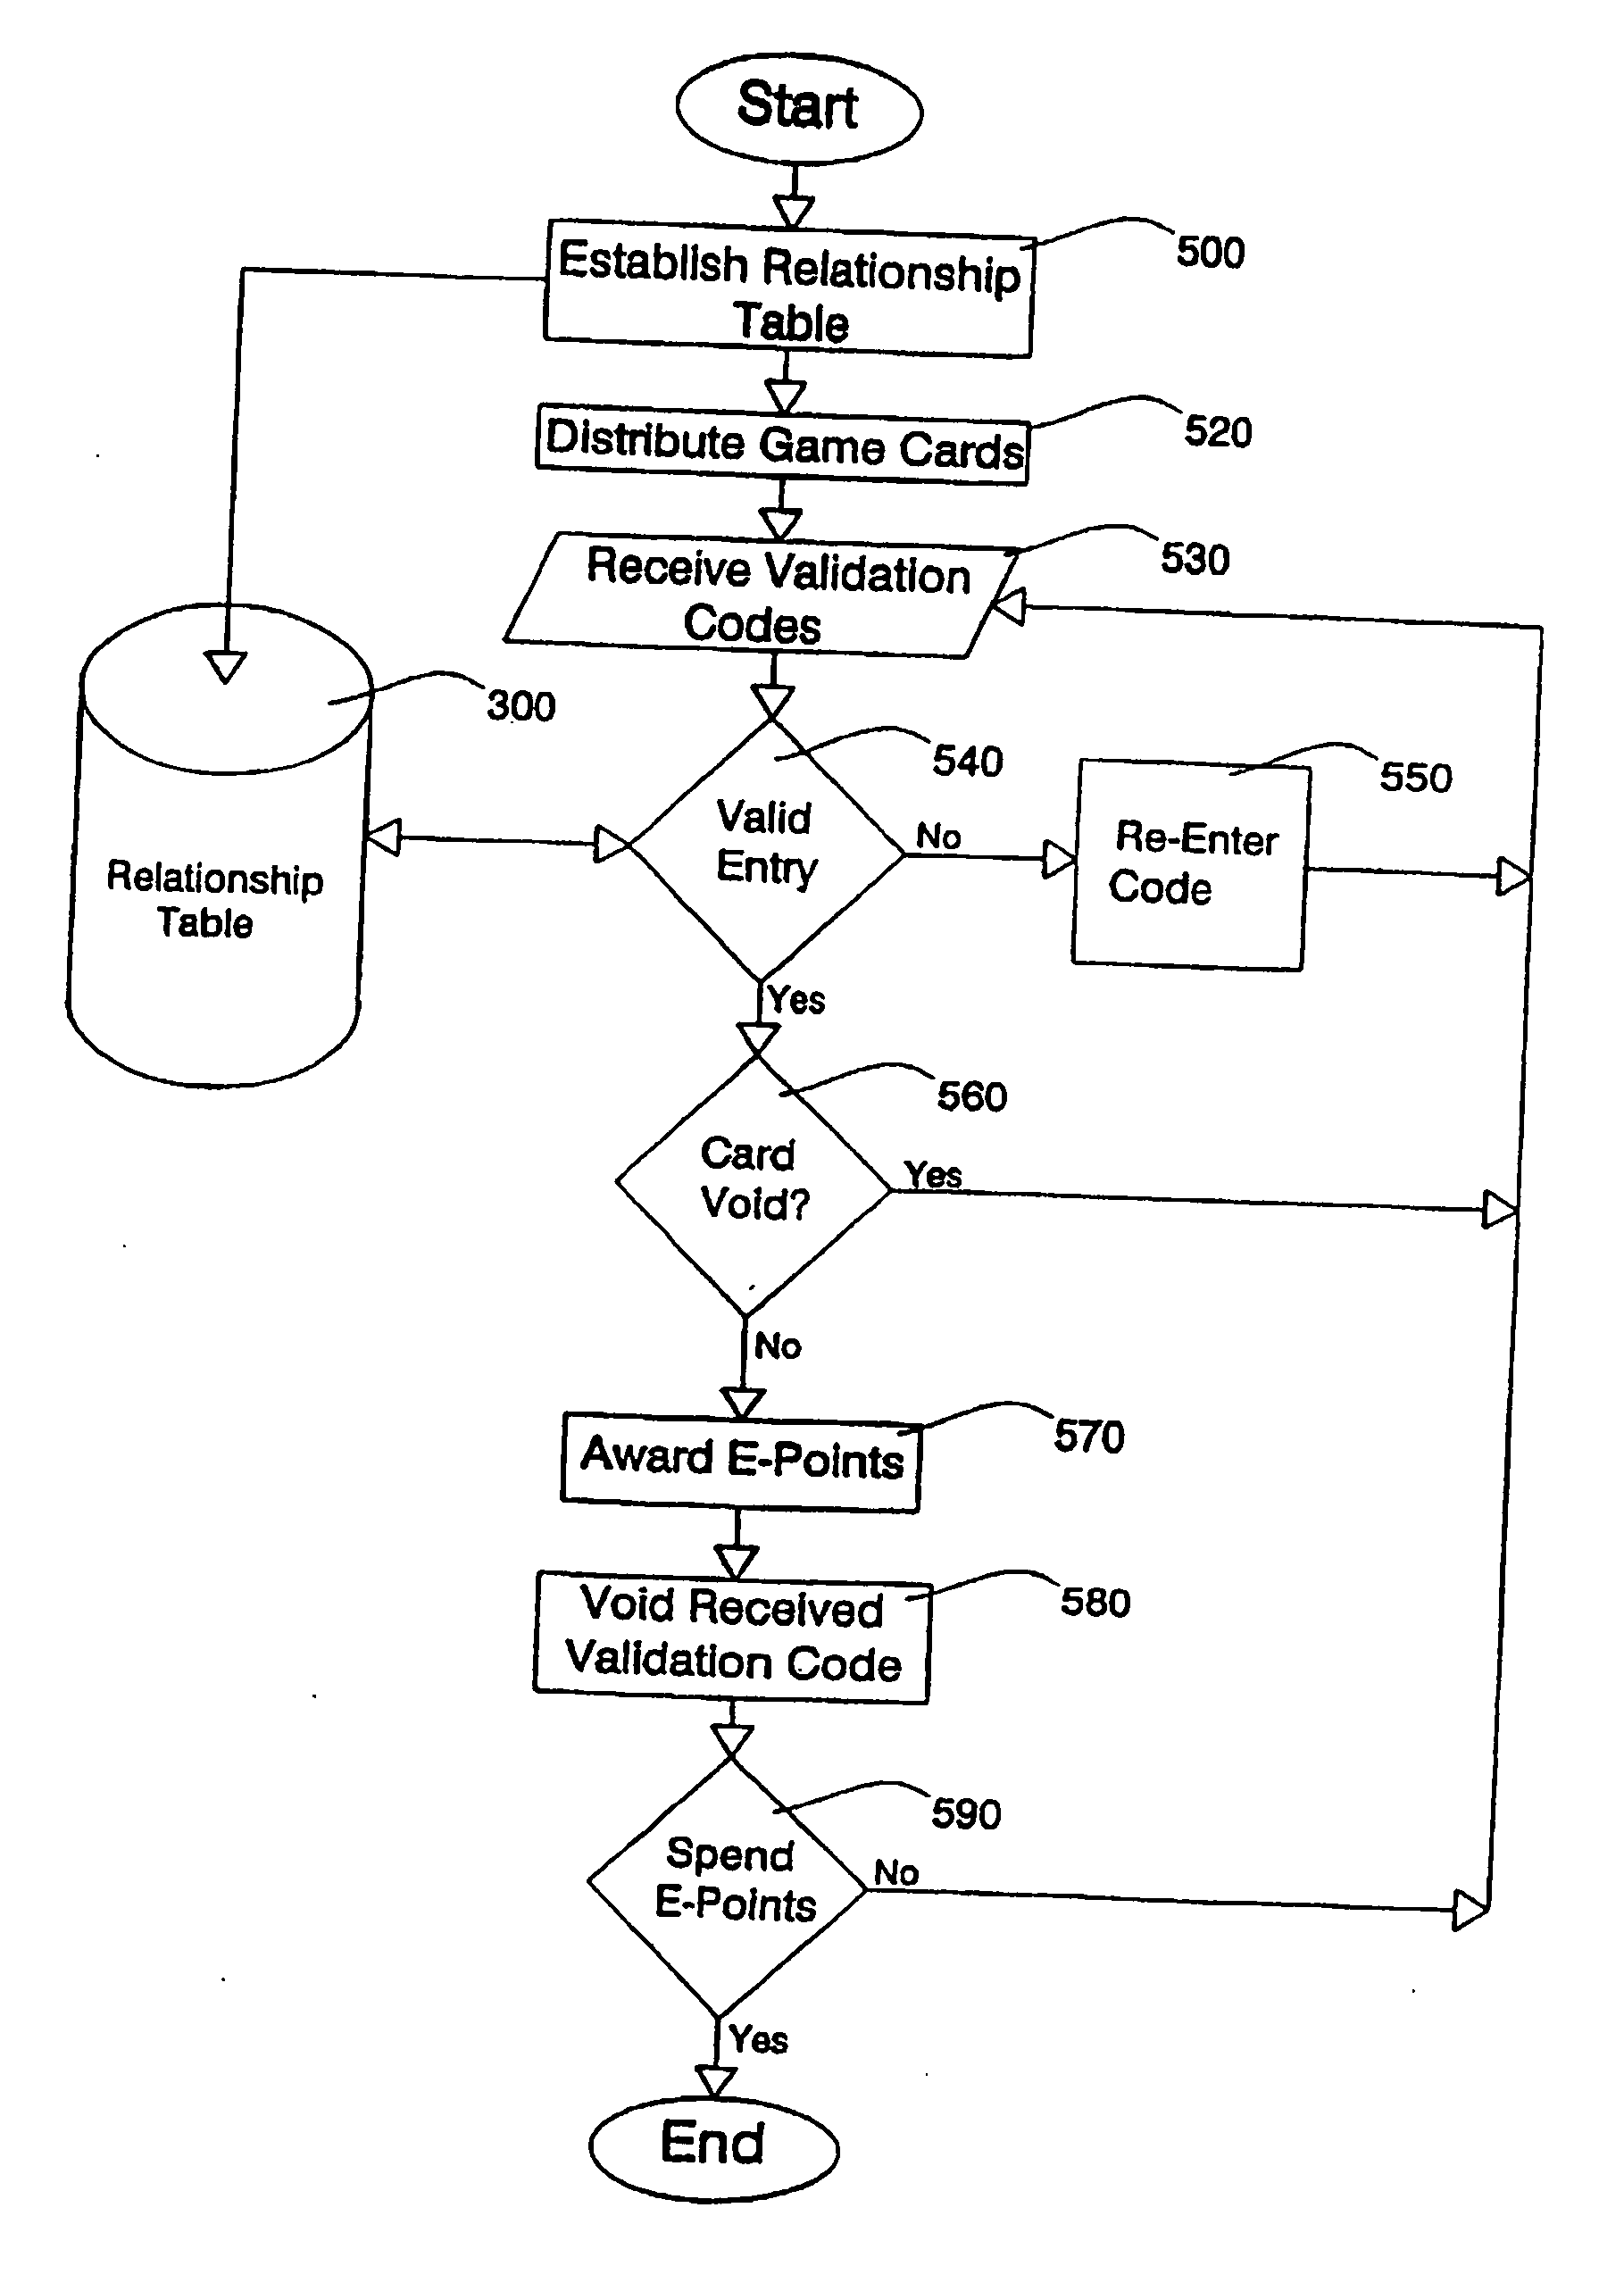 Promotional campaign award validation methods through a distributed computer network